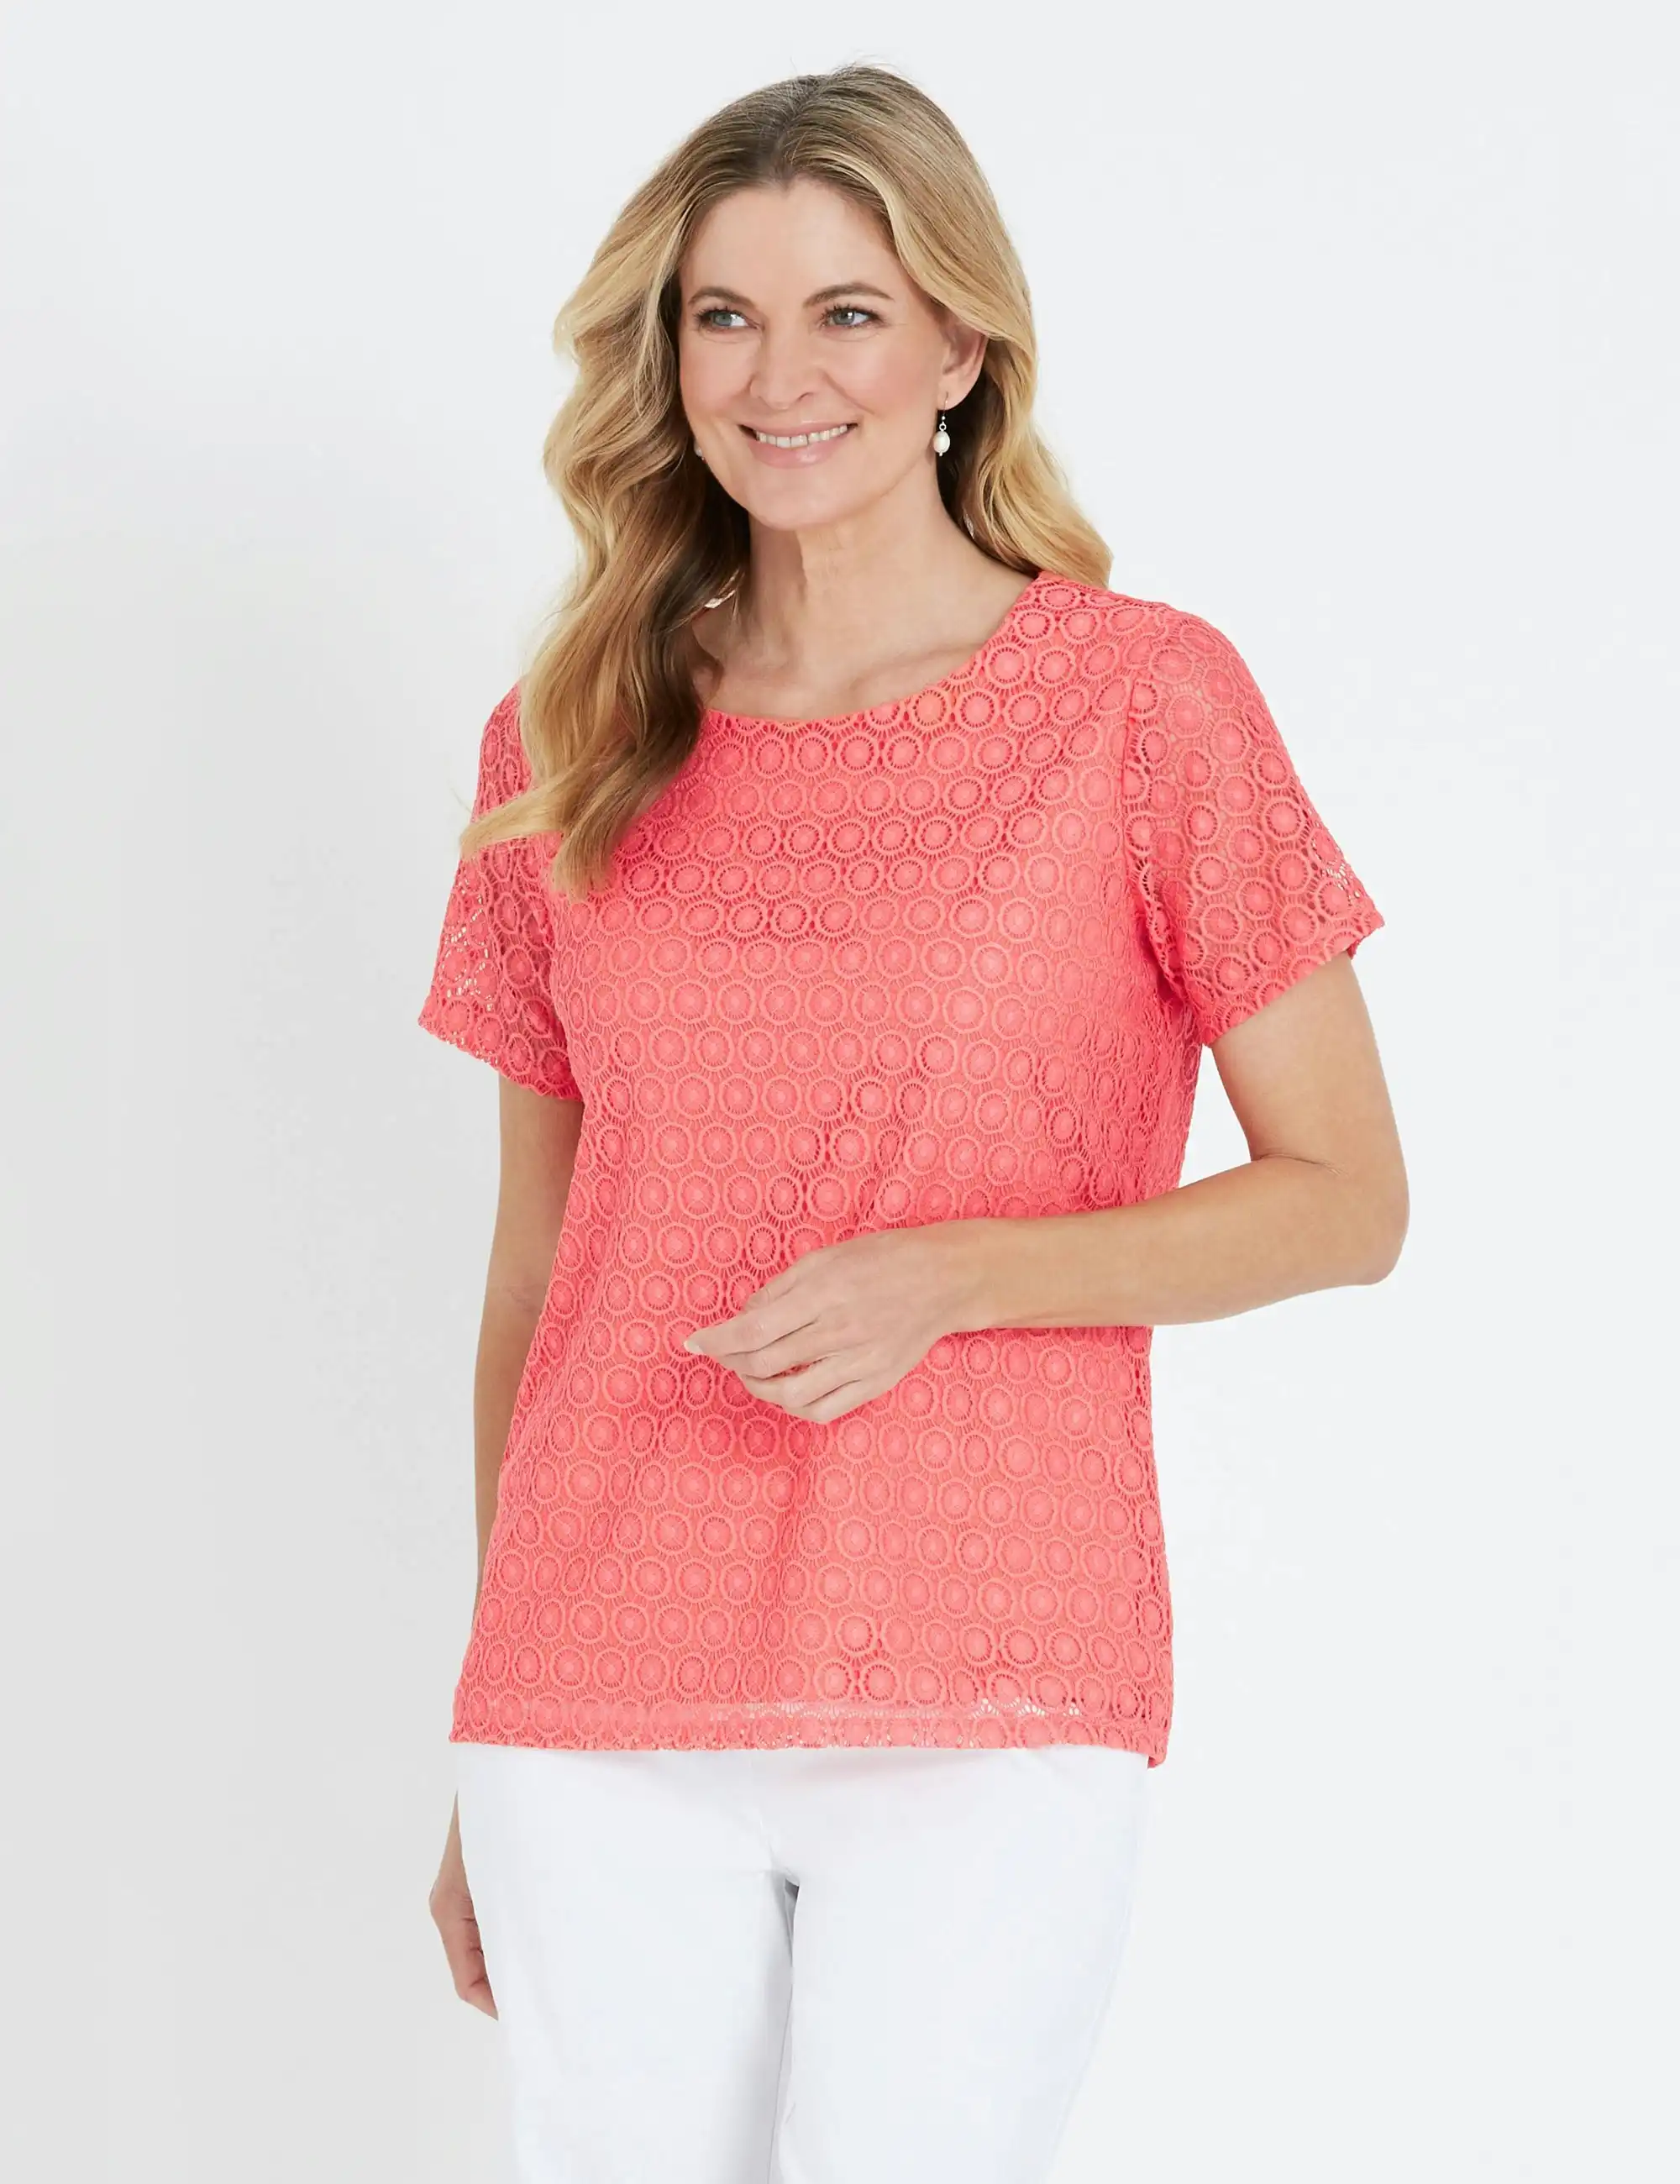 Noni B Short Sleeve Floral Lace Top (Calypso Coral)